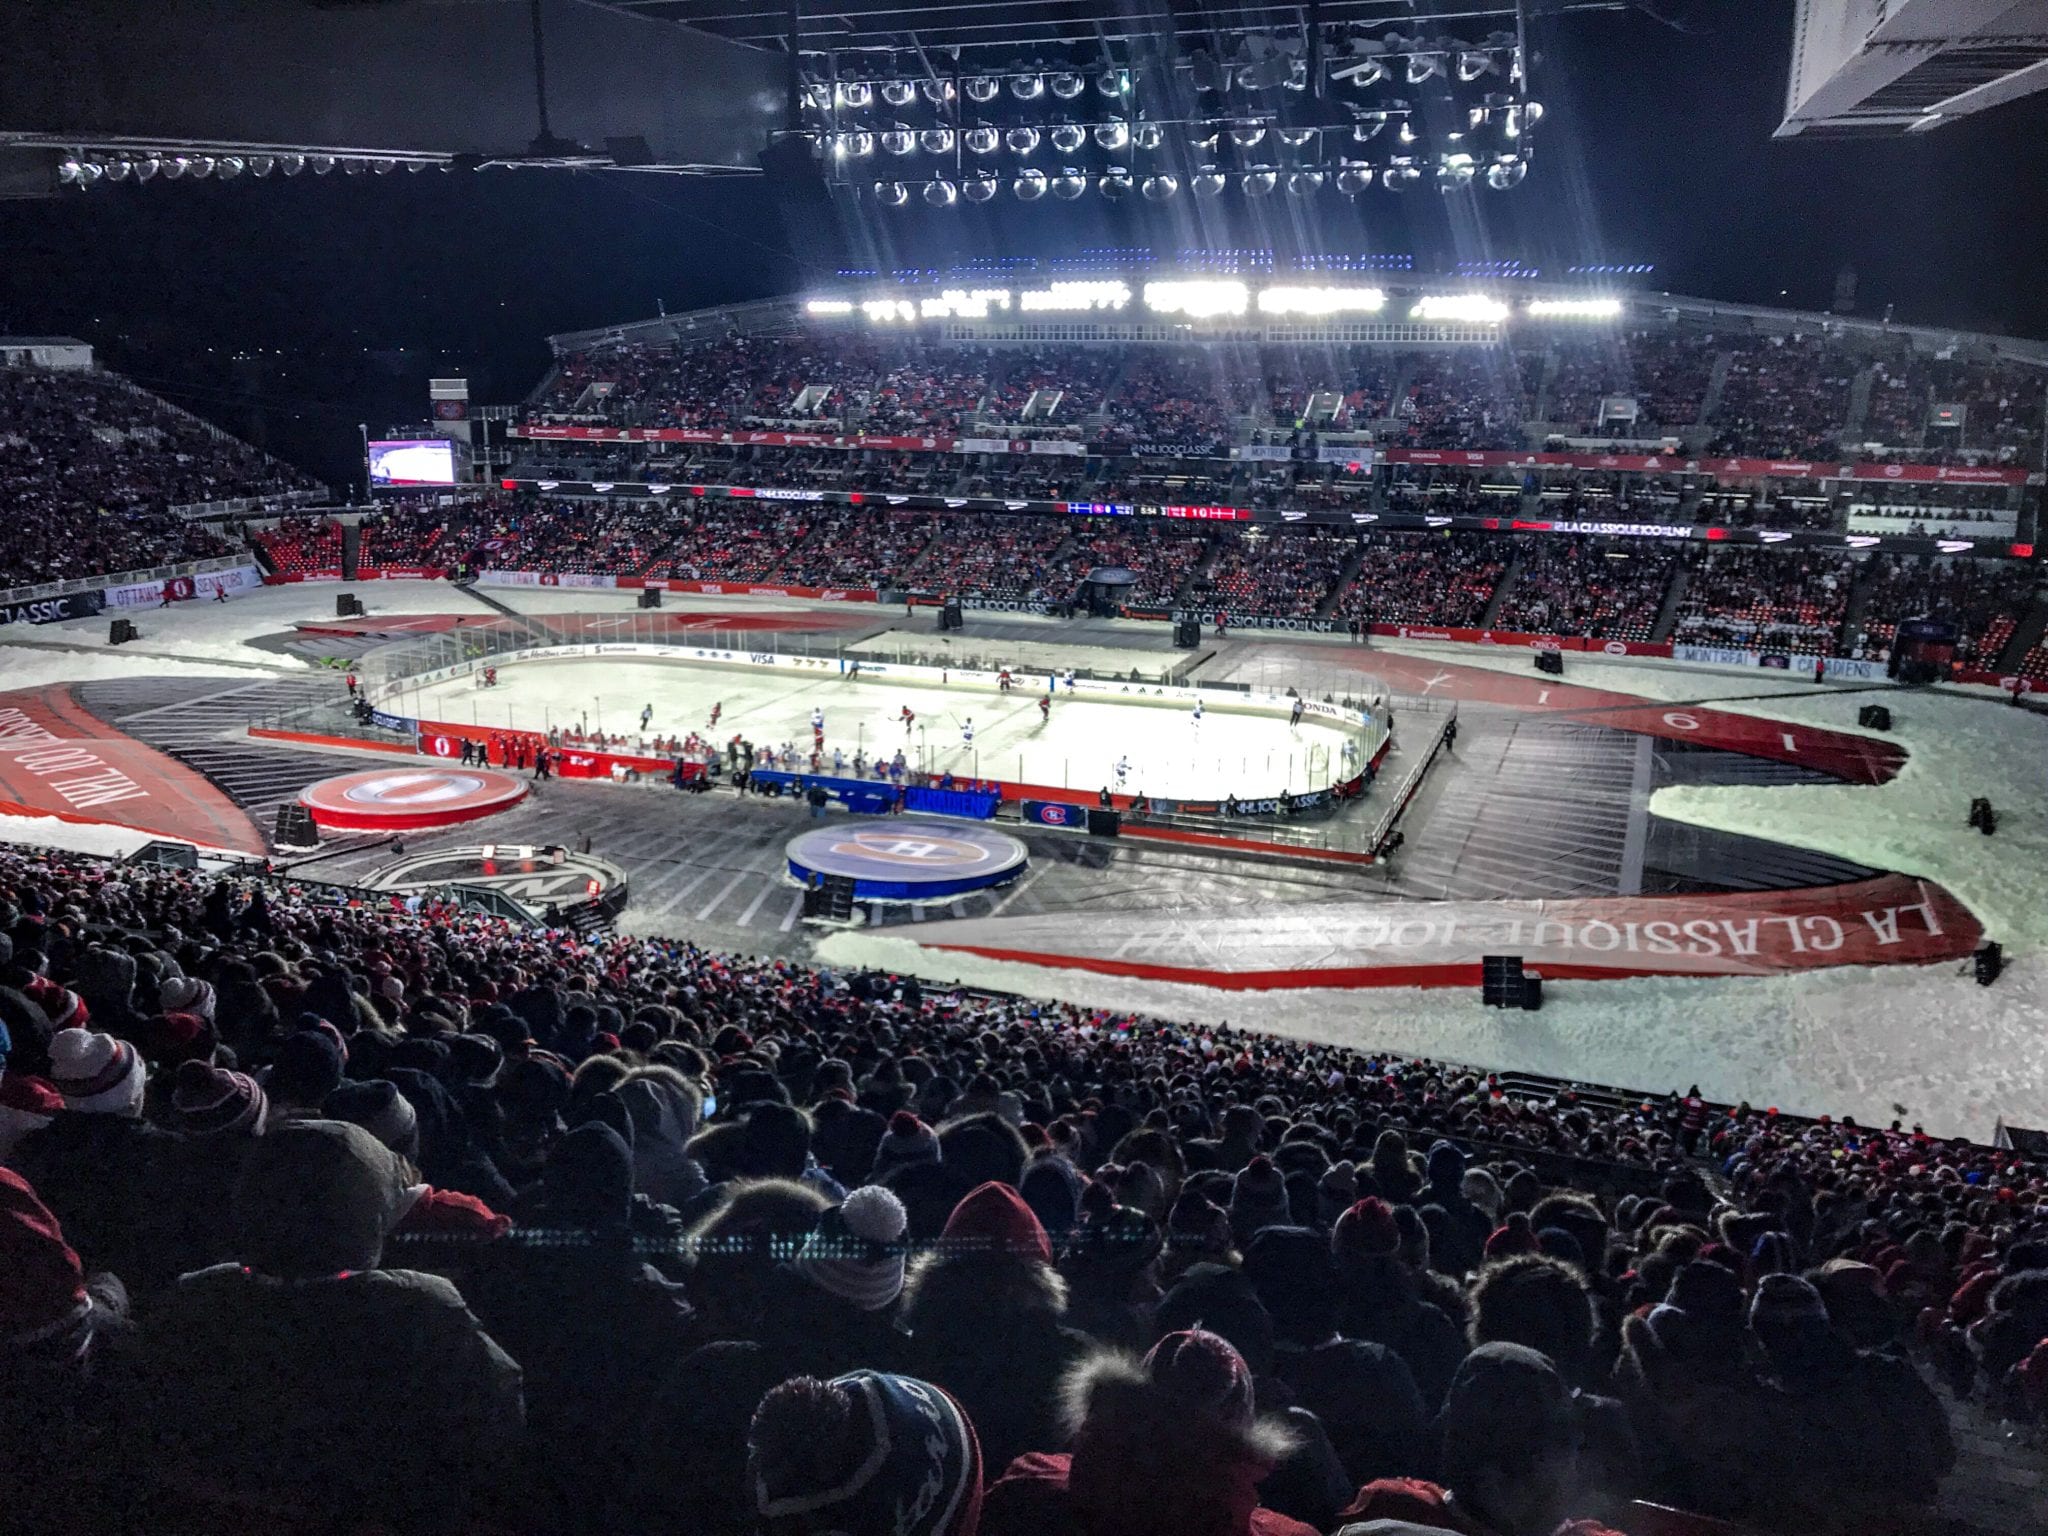 The best outdoor photos of the NHL 100 Classic from Ottawa